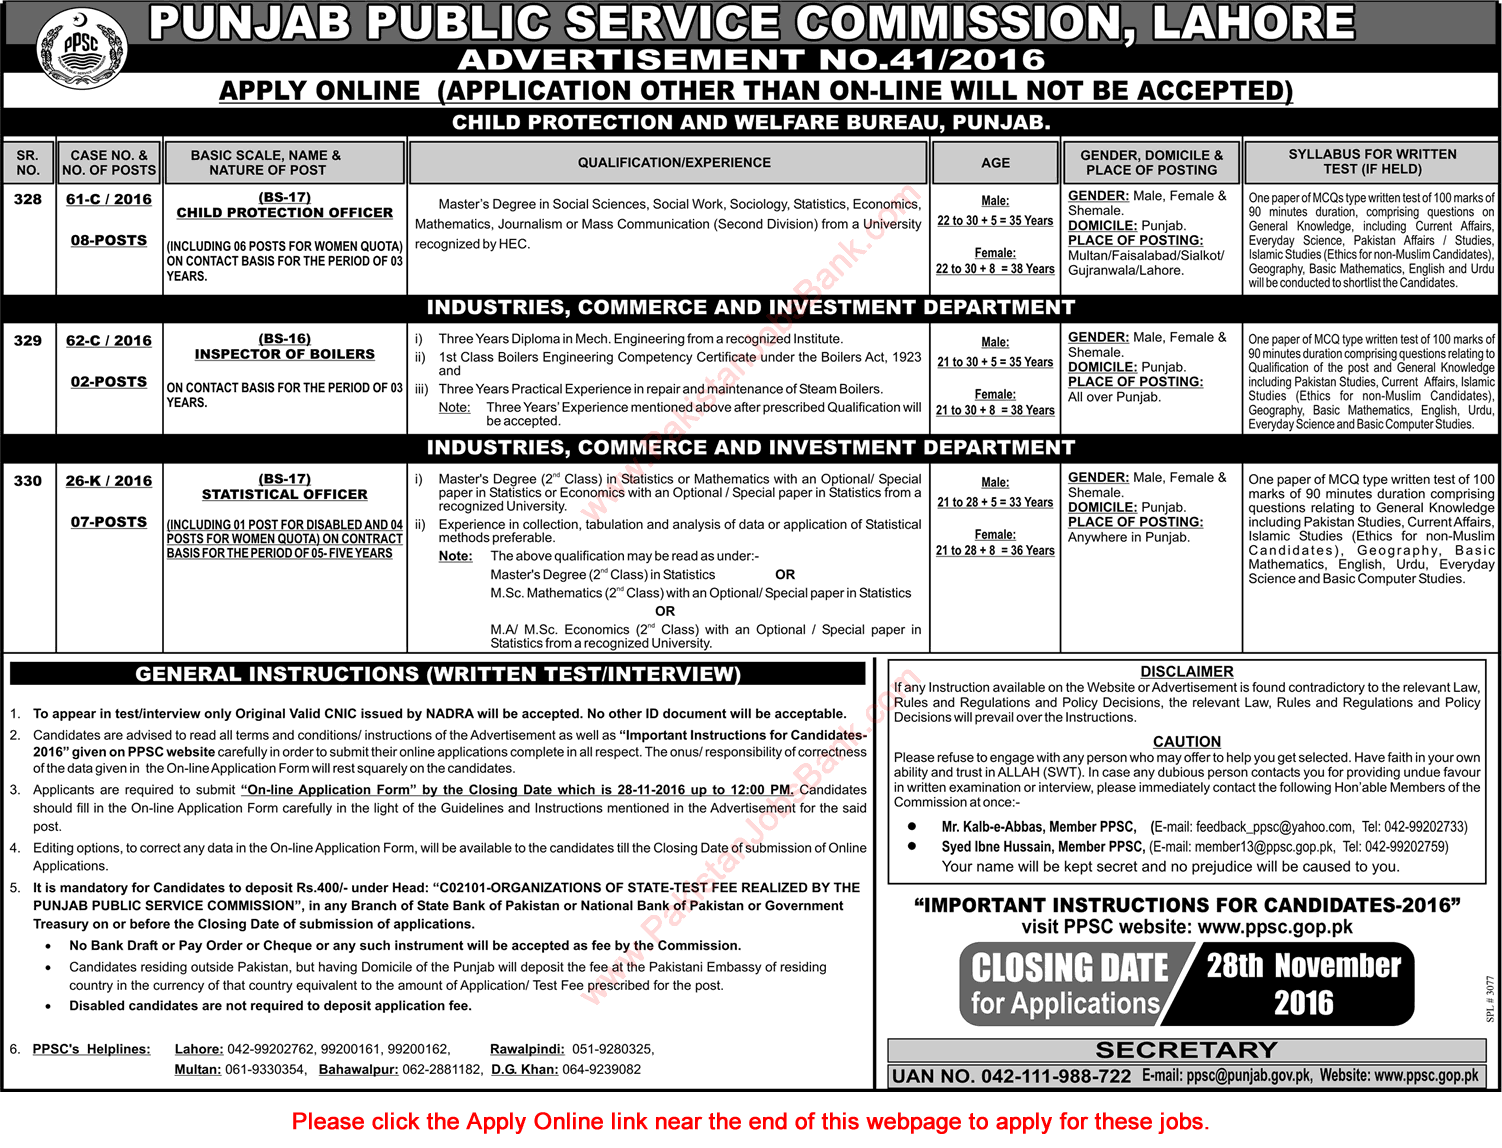 PPSC Jobs November 2016 Consolidated Advertisement No 41/2016 Apply Online Latest